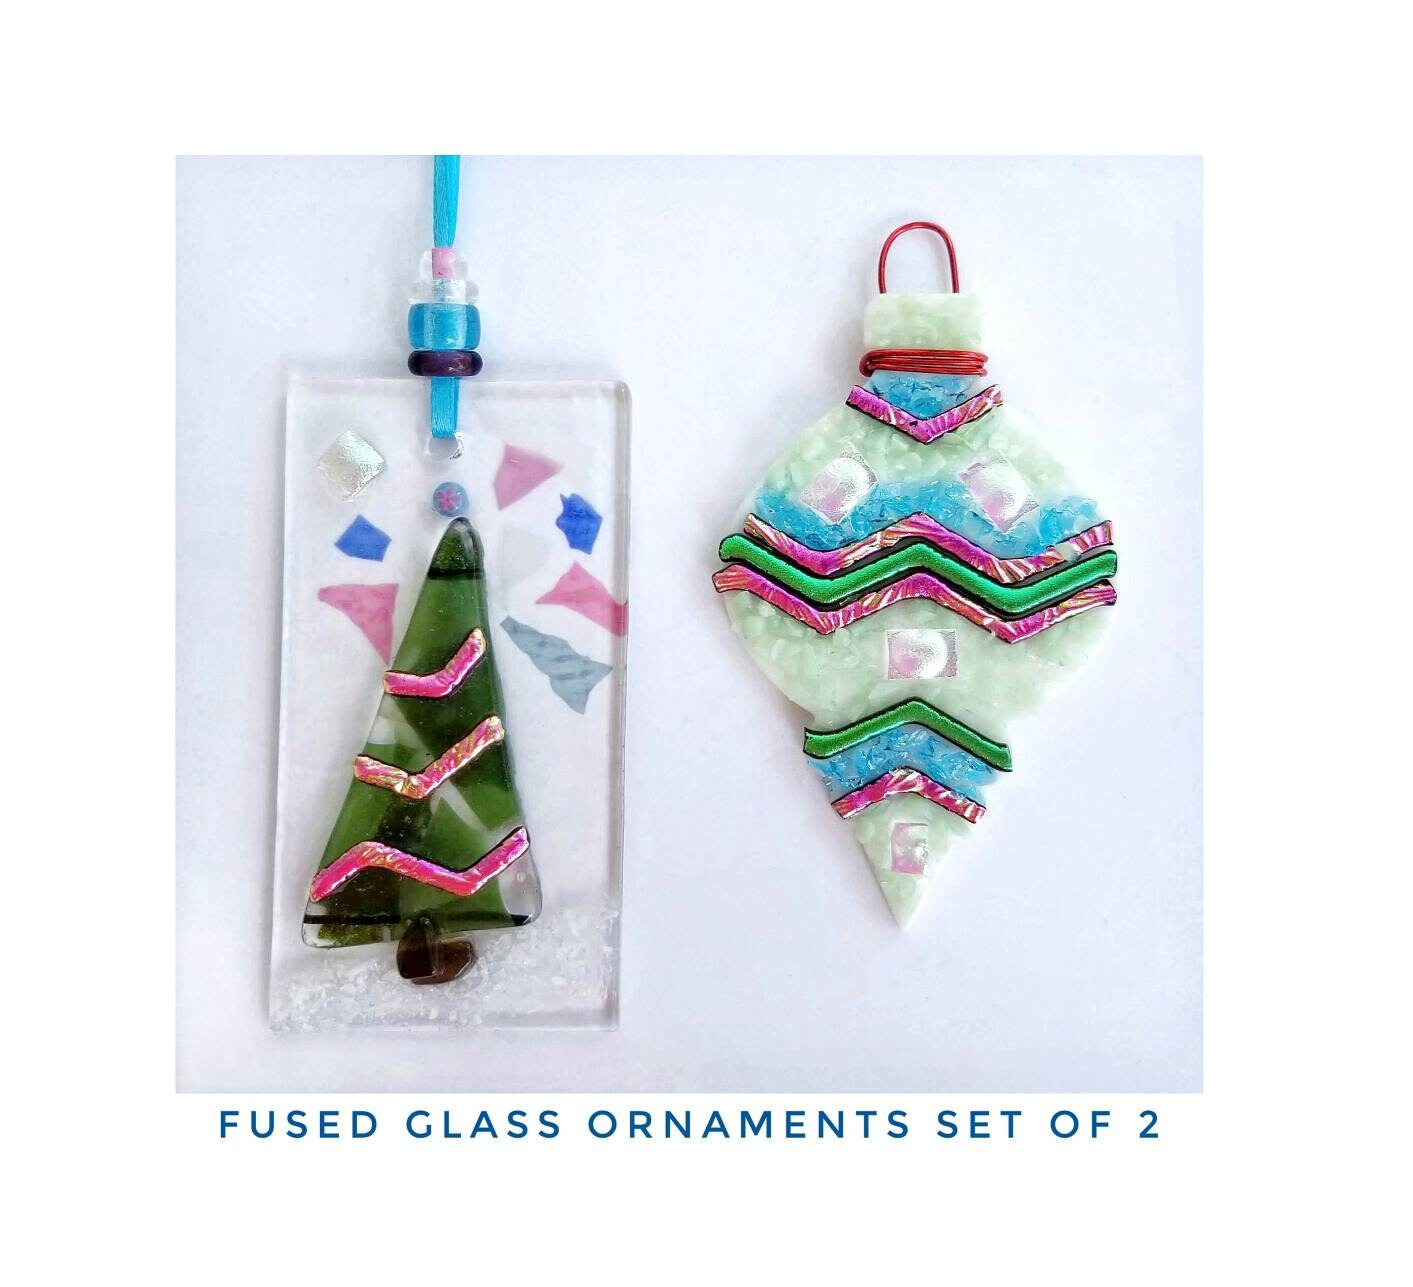 Cute Glass Ornaments. Use as Gift Bag, Basket Items. Set of 2. Fused Glass Art Handmade w/ Bright Dichroic Colors. Kiln Fired. 2 gift boxes.